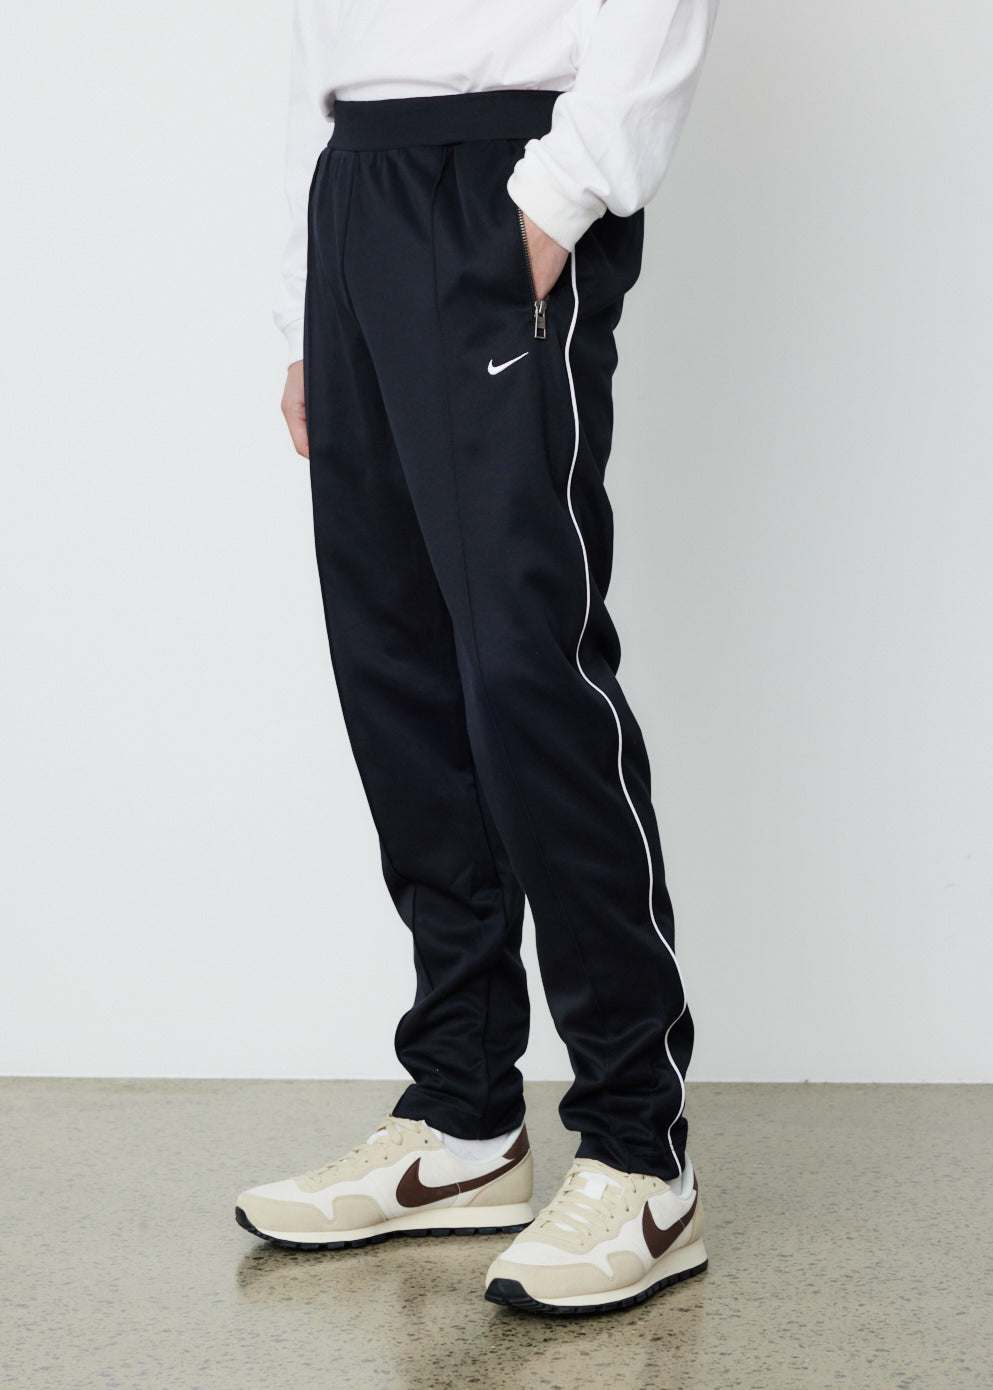 Black navy gray Lower Nike Track Pants, Age: 17 To 55, Size: M L Xl Xxl at  Rs 275/piece in New Delhi